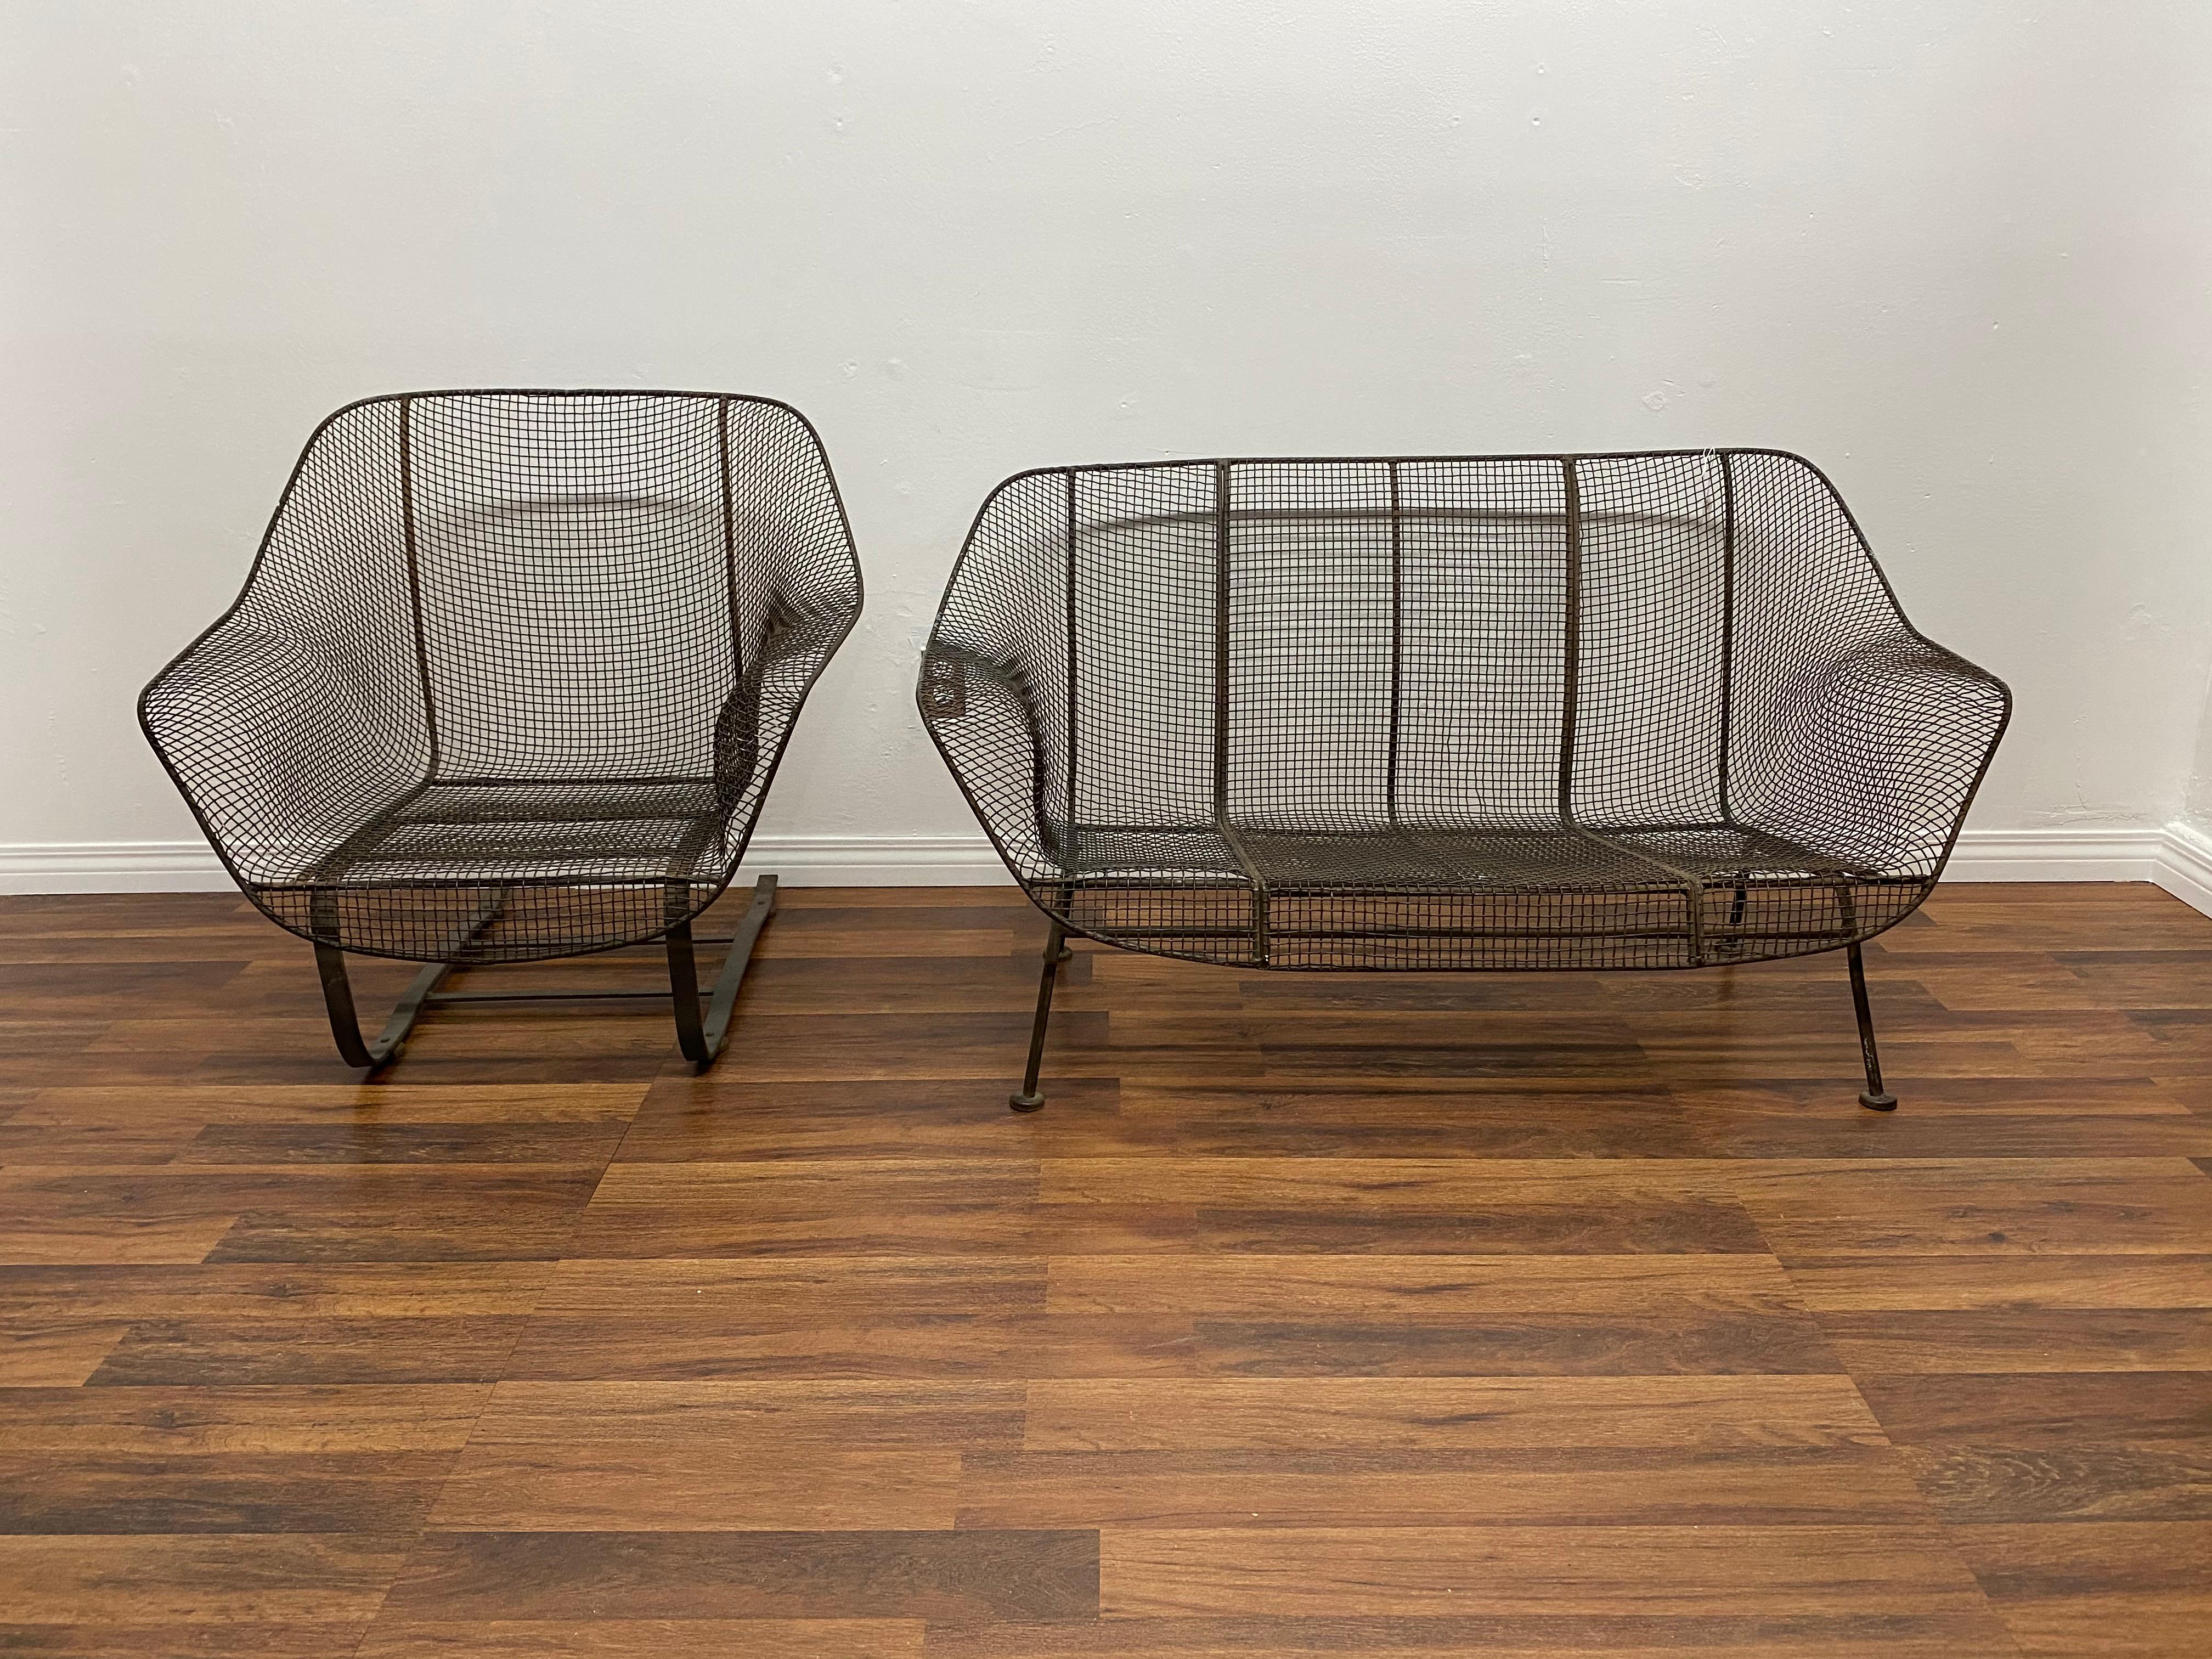 A 1950s wrought iron and steel mesh settee and cantilevered rocking chair from Russell Woodard's Classic and iconic Sculptura line. Original finish, age appropriate wear no broken welds or mesh

Measures: Settee H 27 in. x W 52.5 in. x D 28